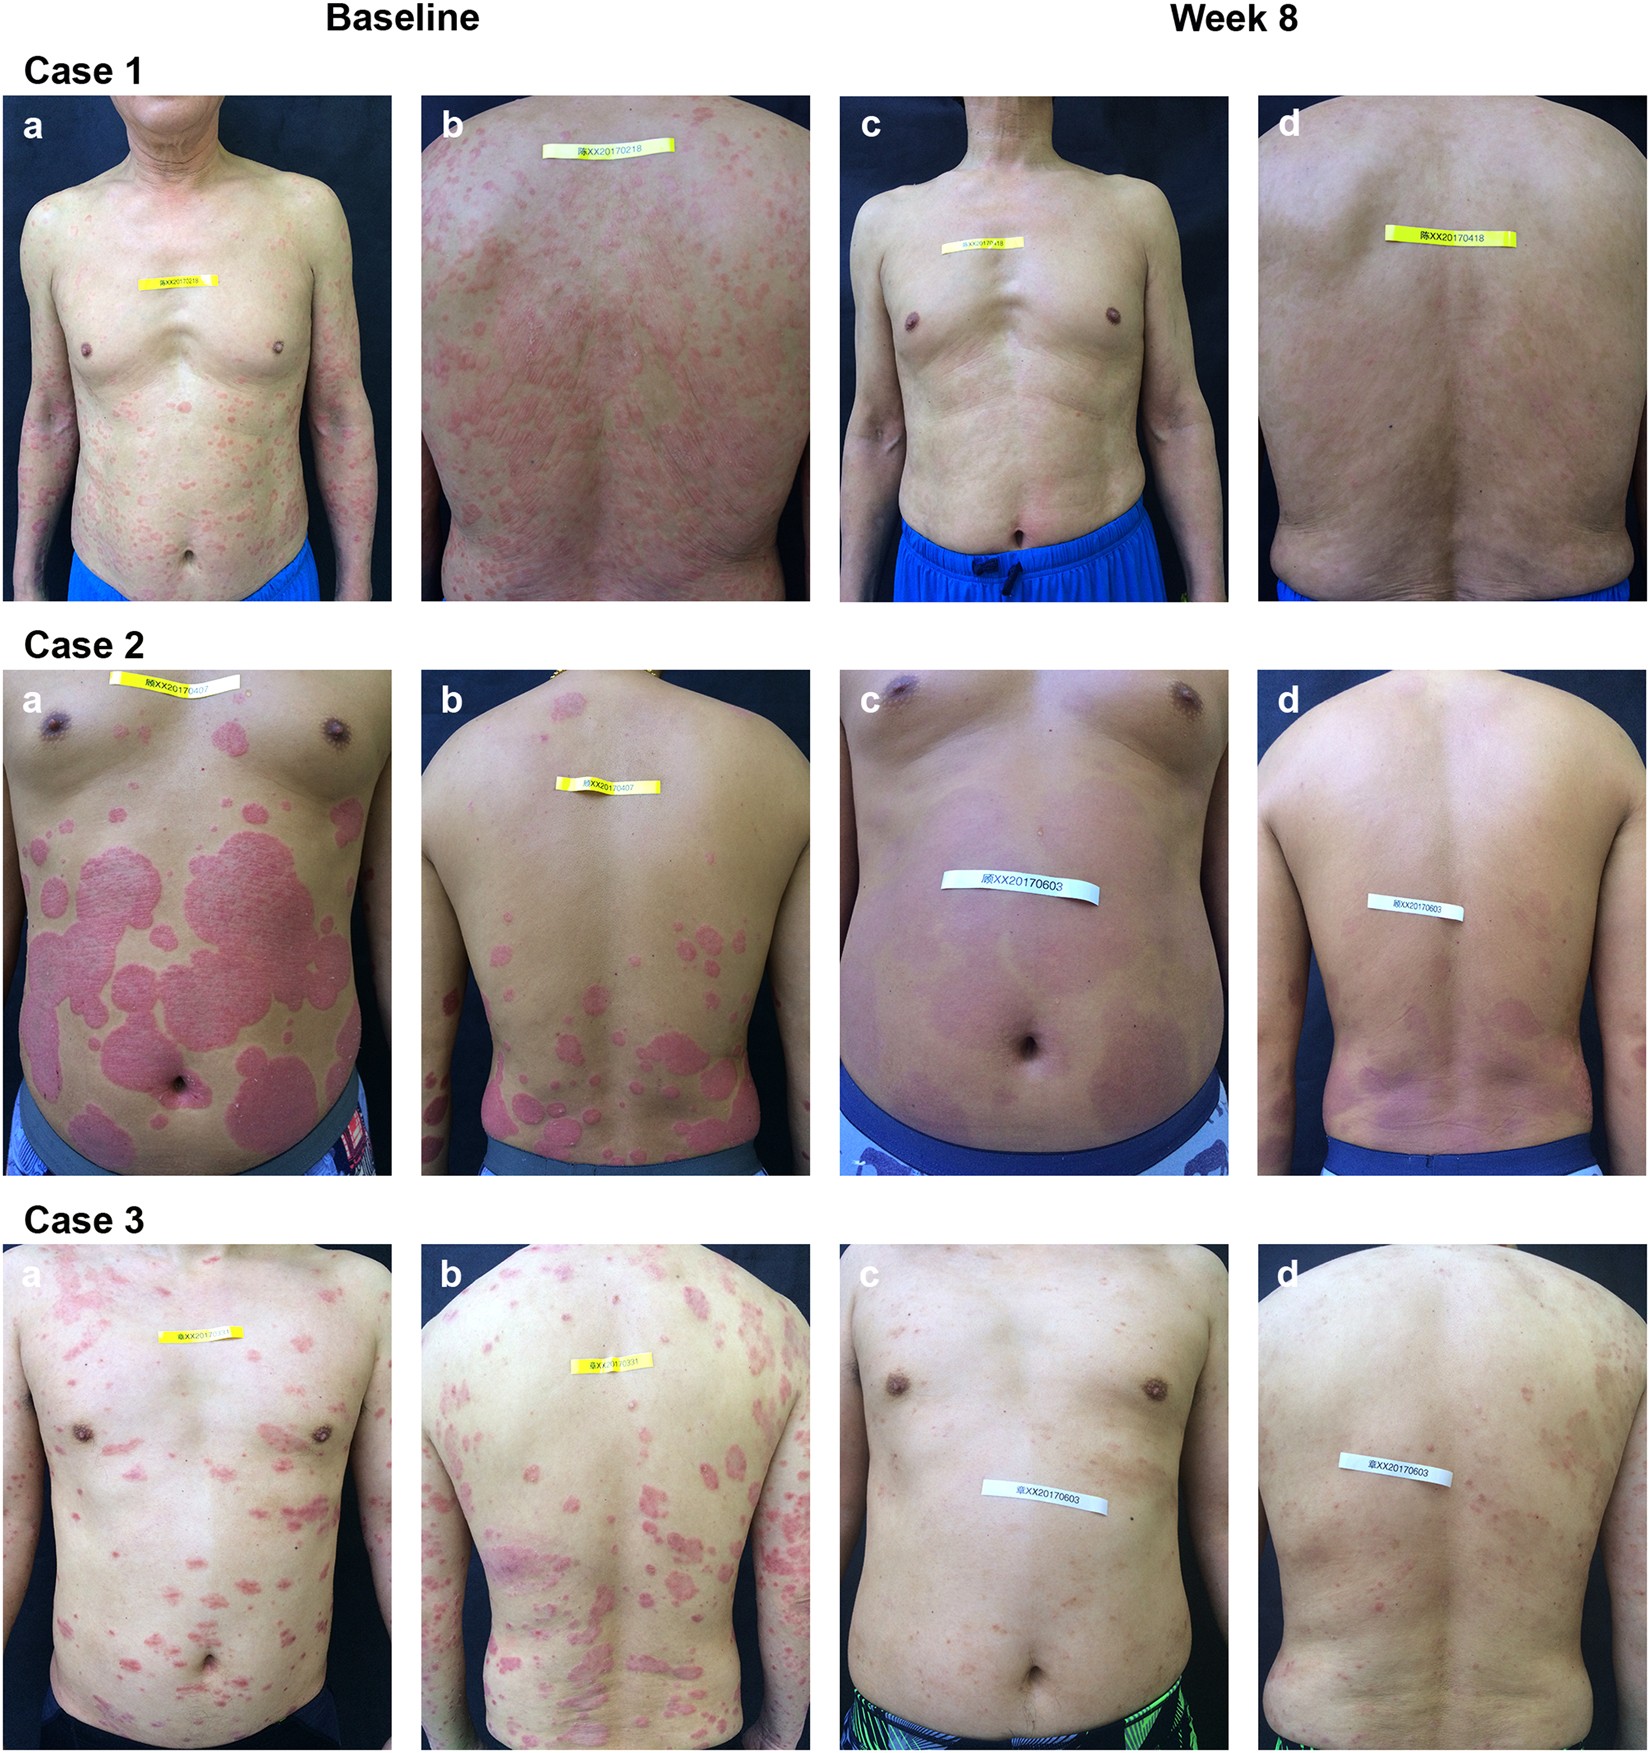 Positive effects of hydrogen-water bathing in patients of psoriasis and  parapsoriasis en plaques | Scientific Reports